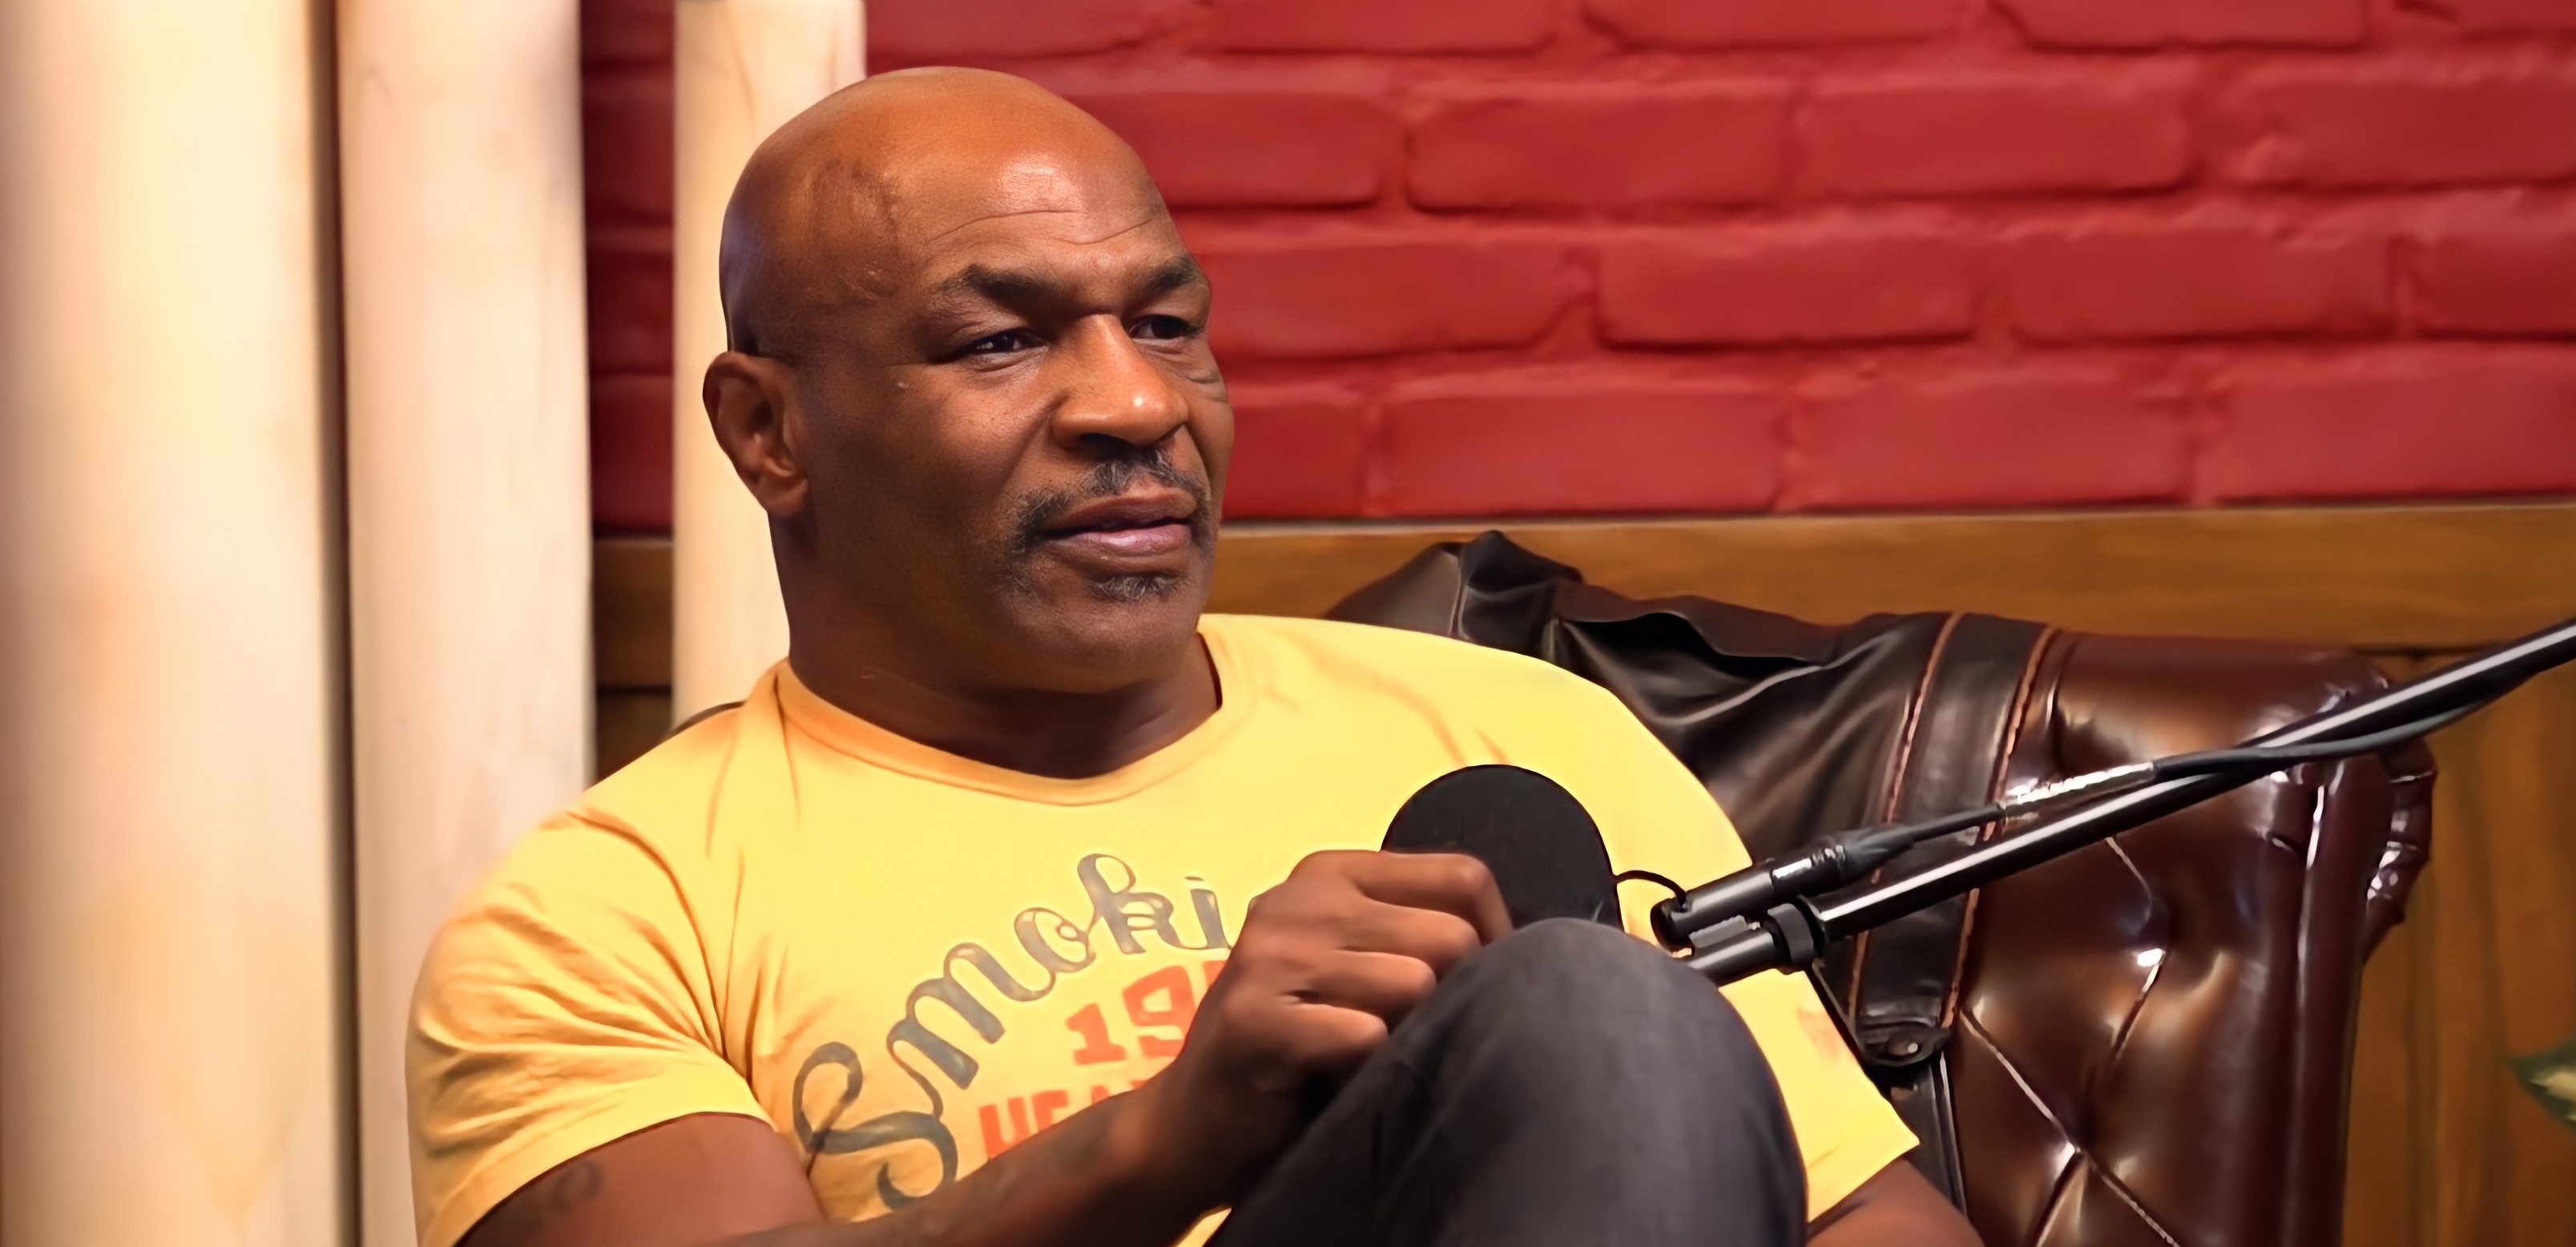 Who Was Mike Tyson’s Biological Father? Is He Dead or Alive?